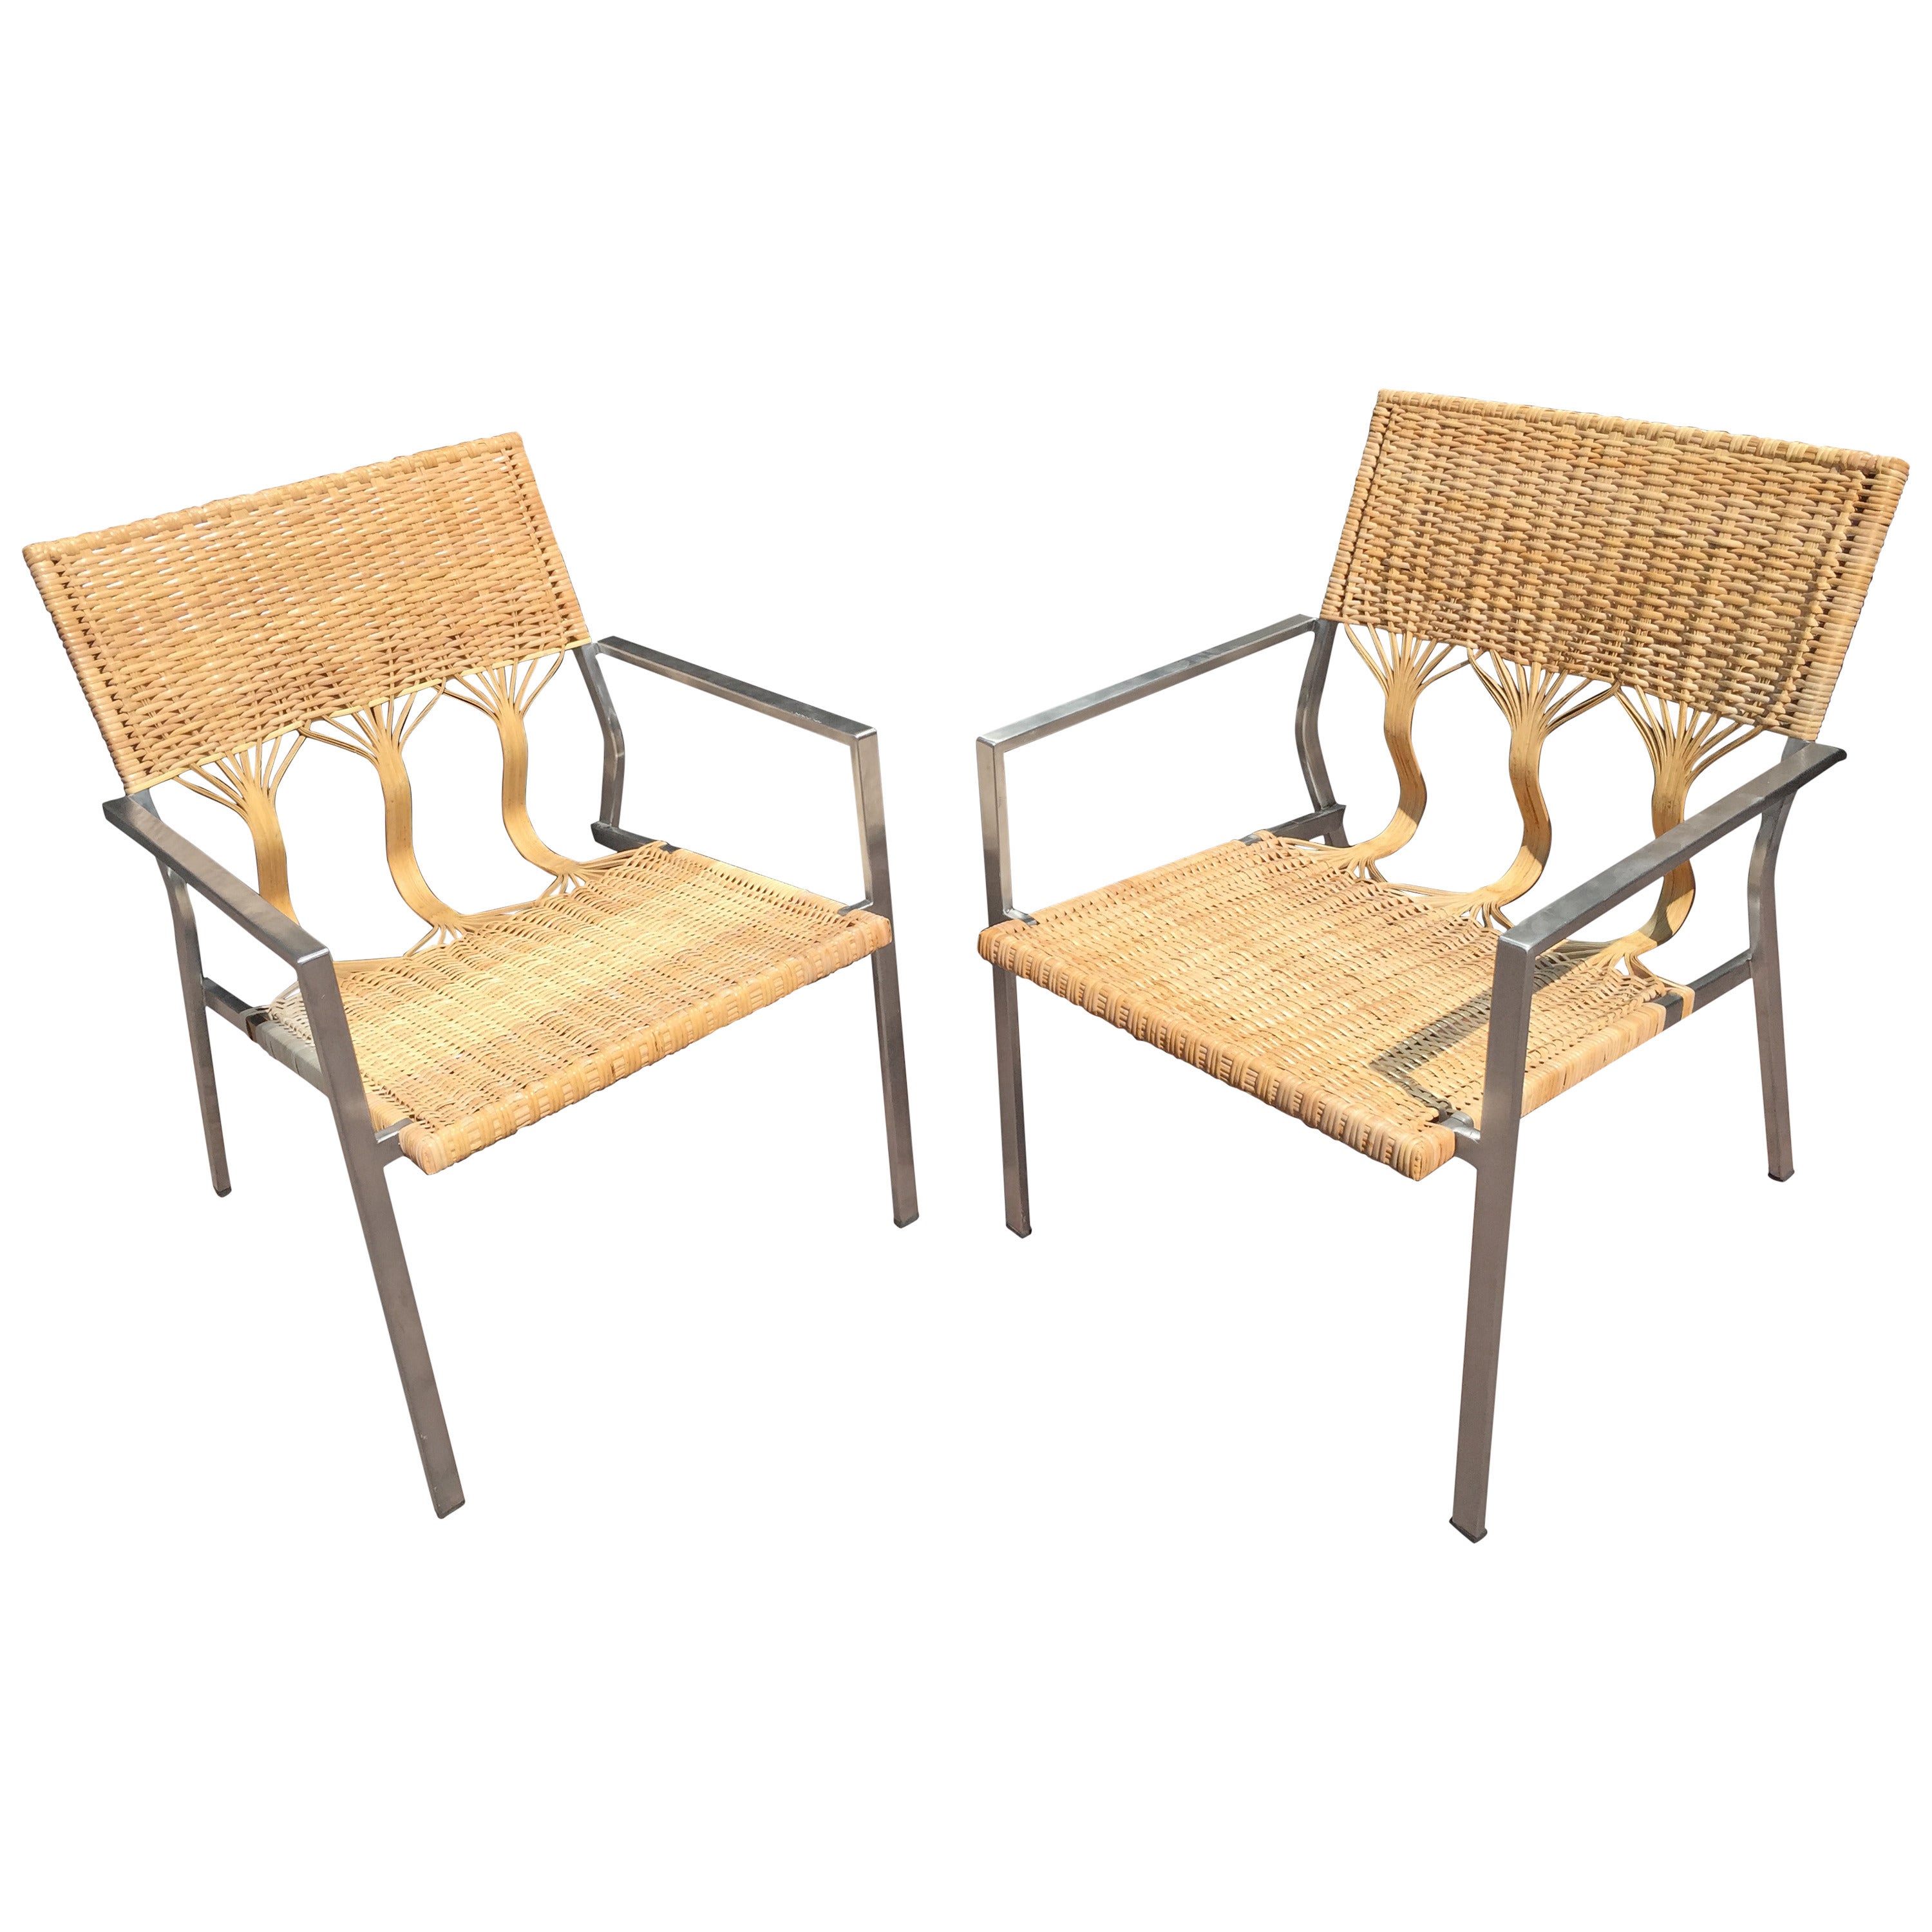 Four Adrien Gardere woven bamboo and rattan chairs, each one with tree trunk backrest and stainless steel frames.